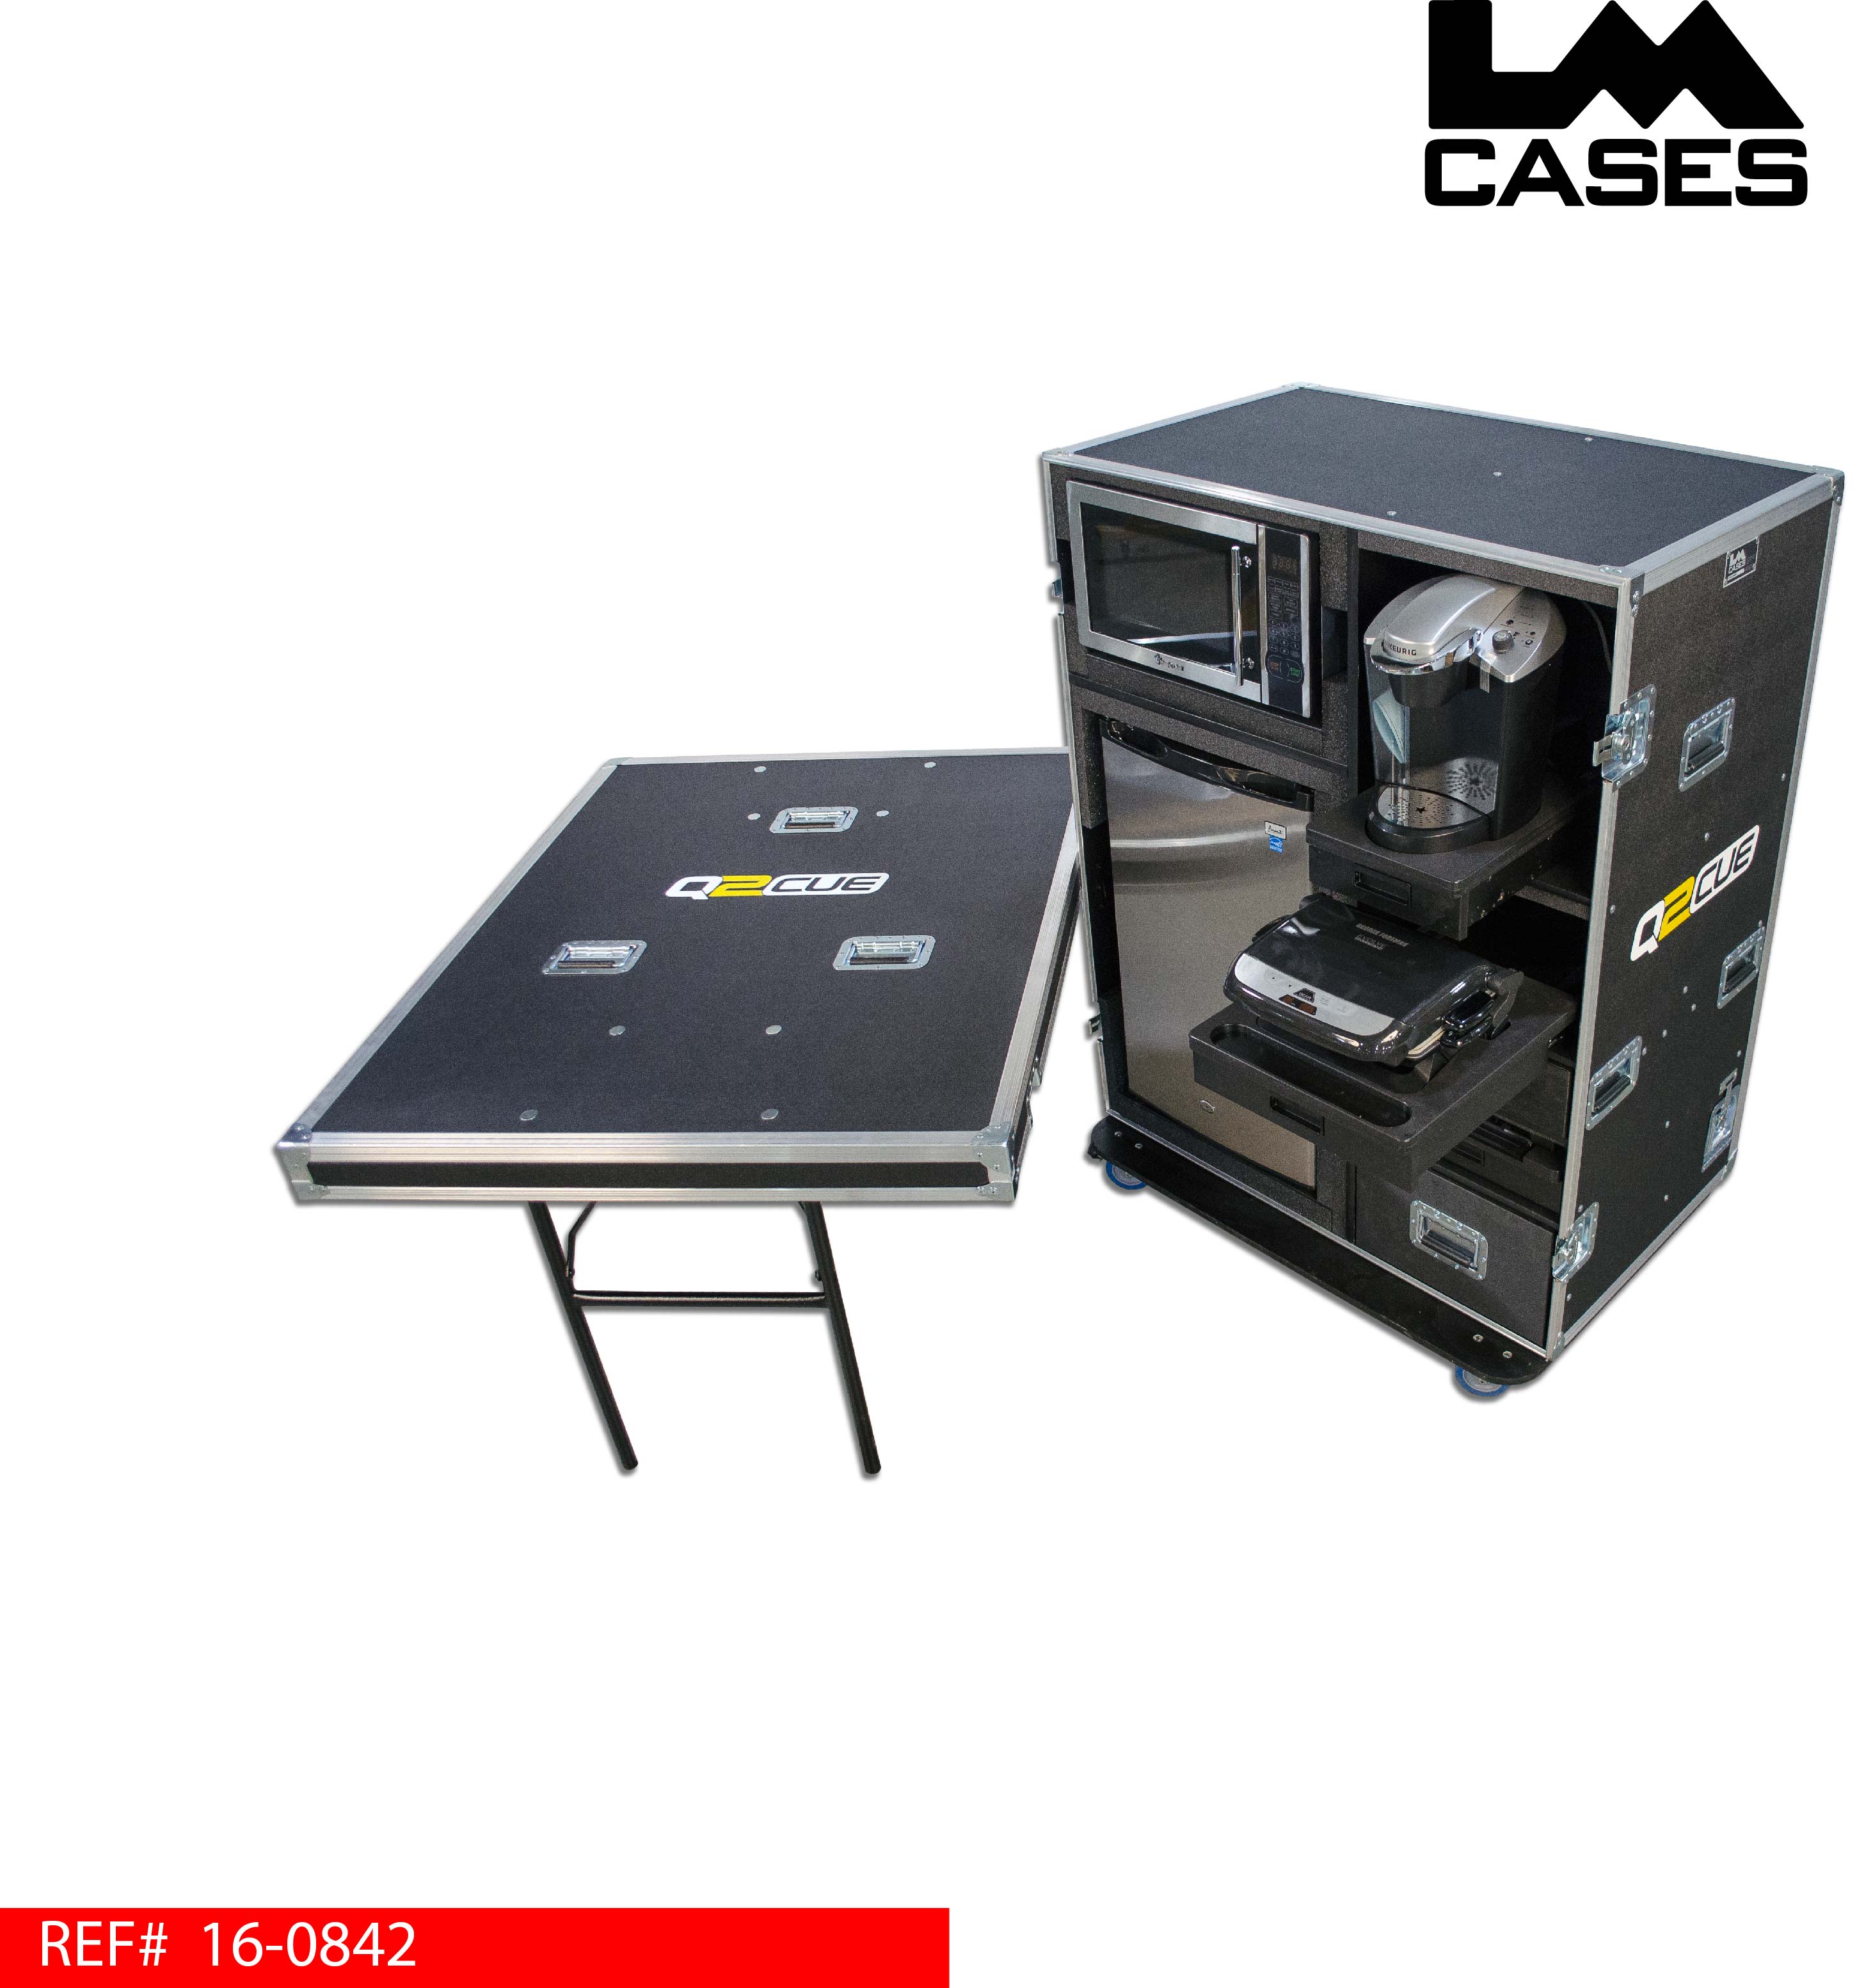 LM Cases: Products